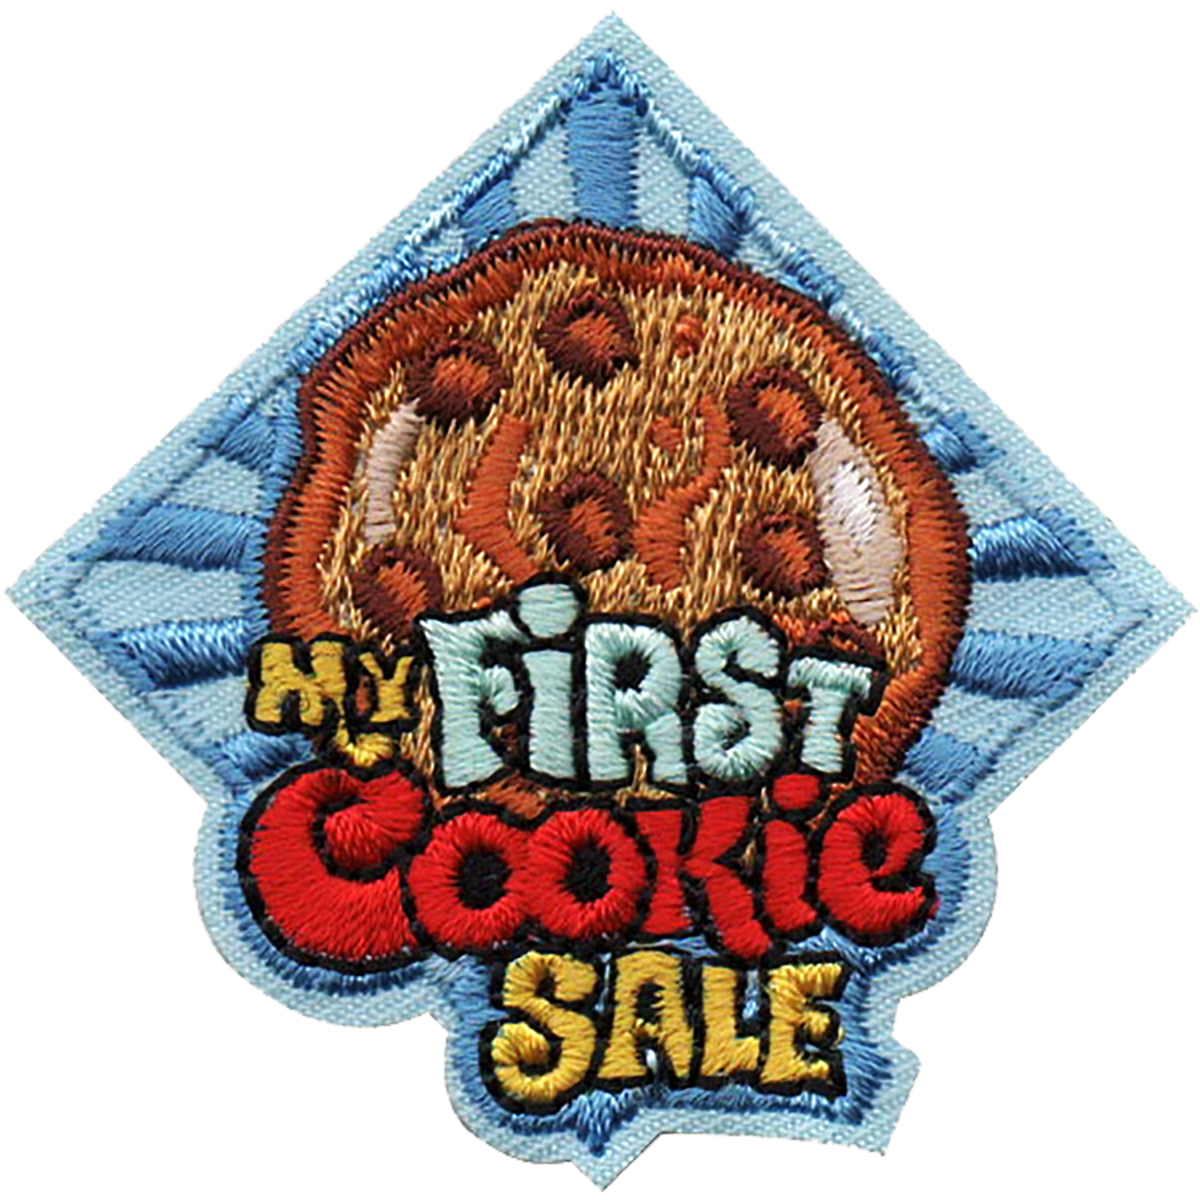 My First Cookie Sale - W 